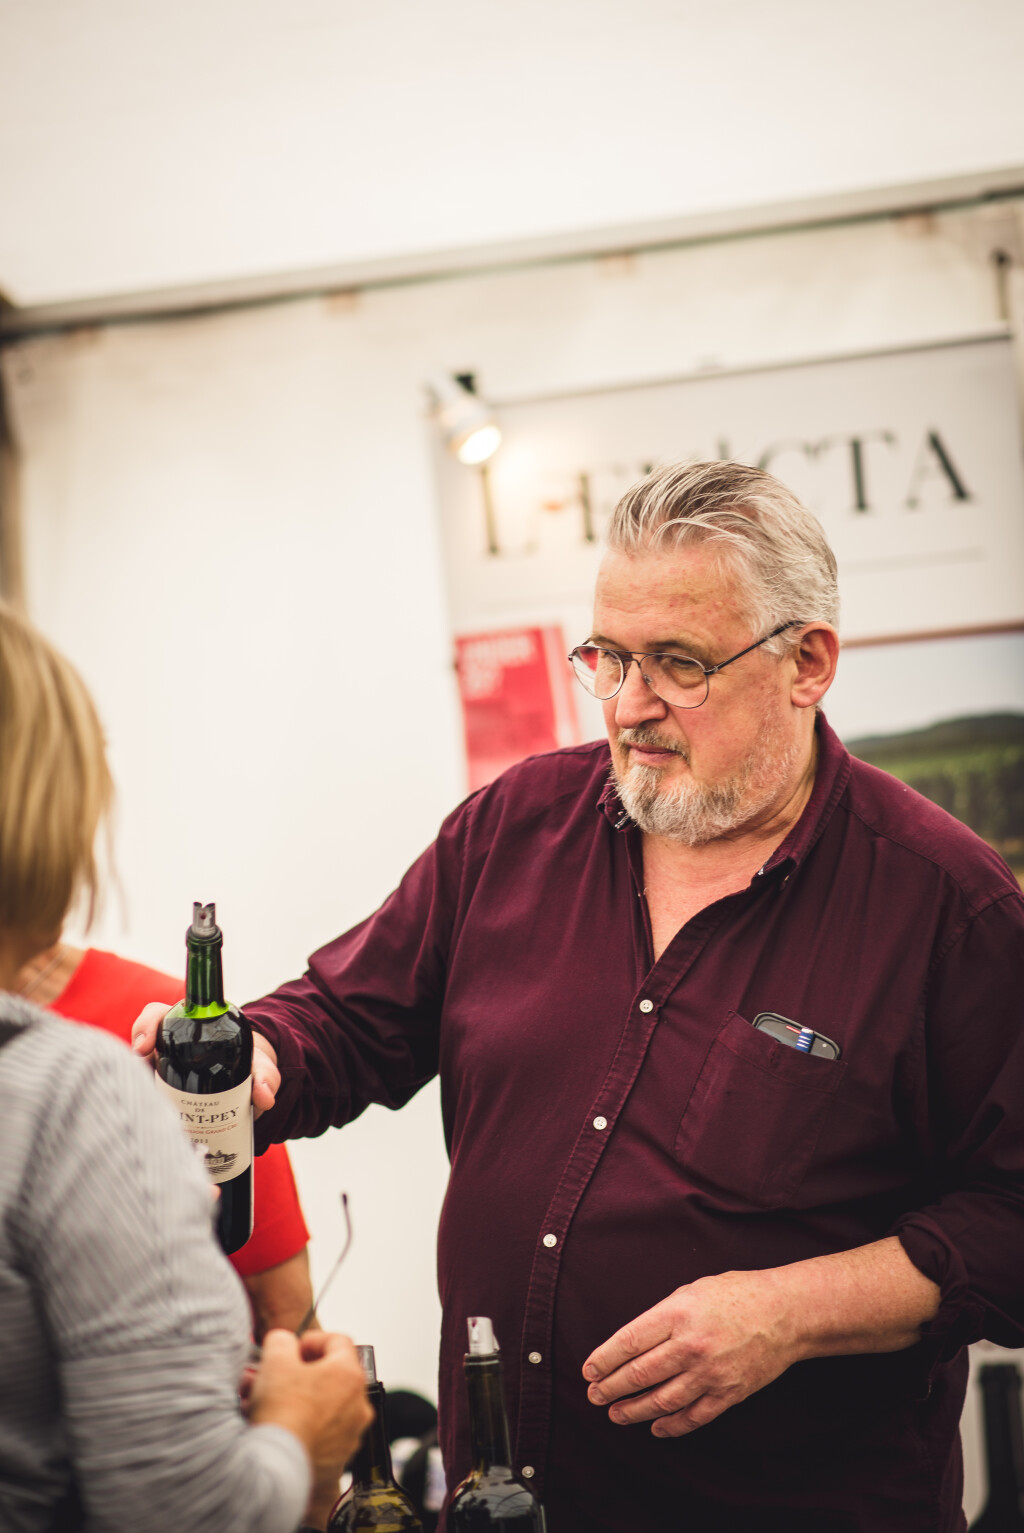 A trader holding a bottle of wine serving some tasters to a customer